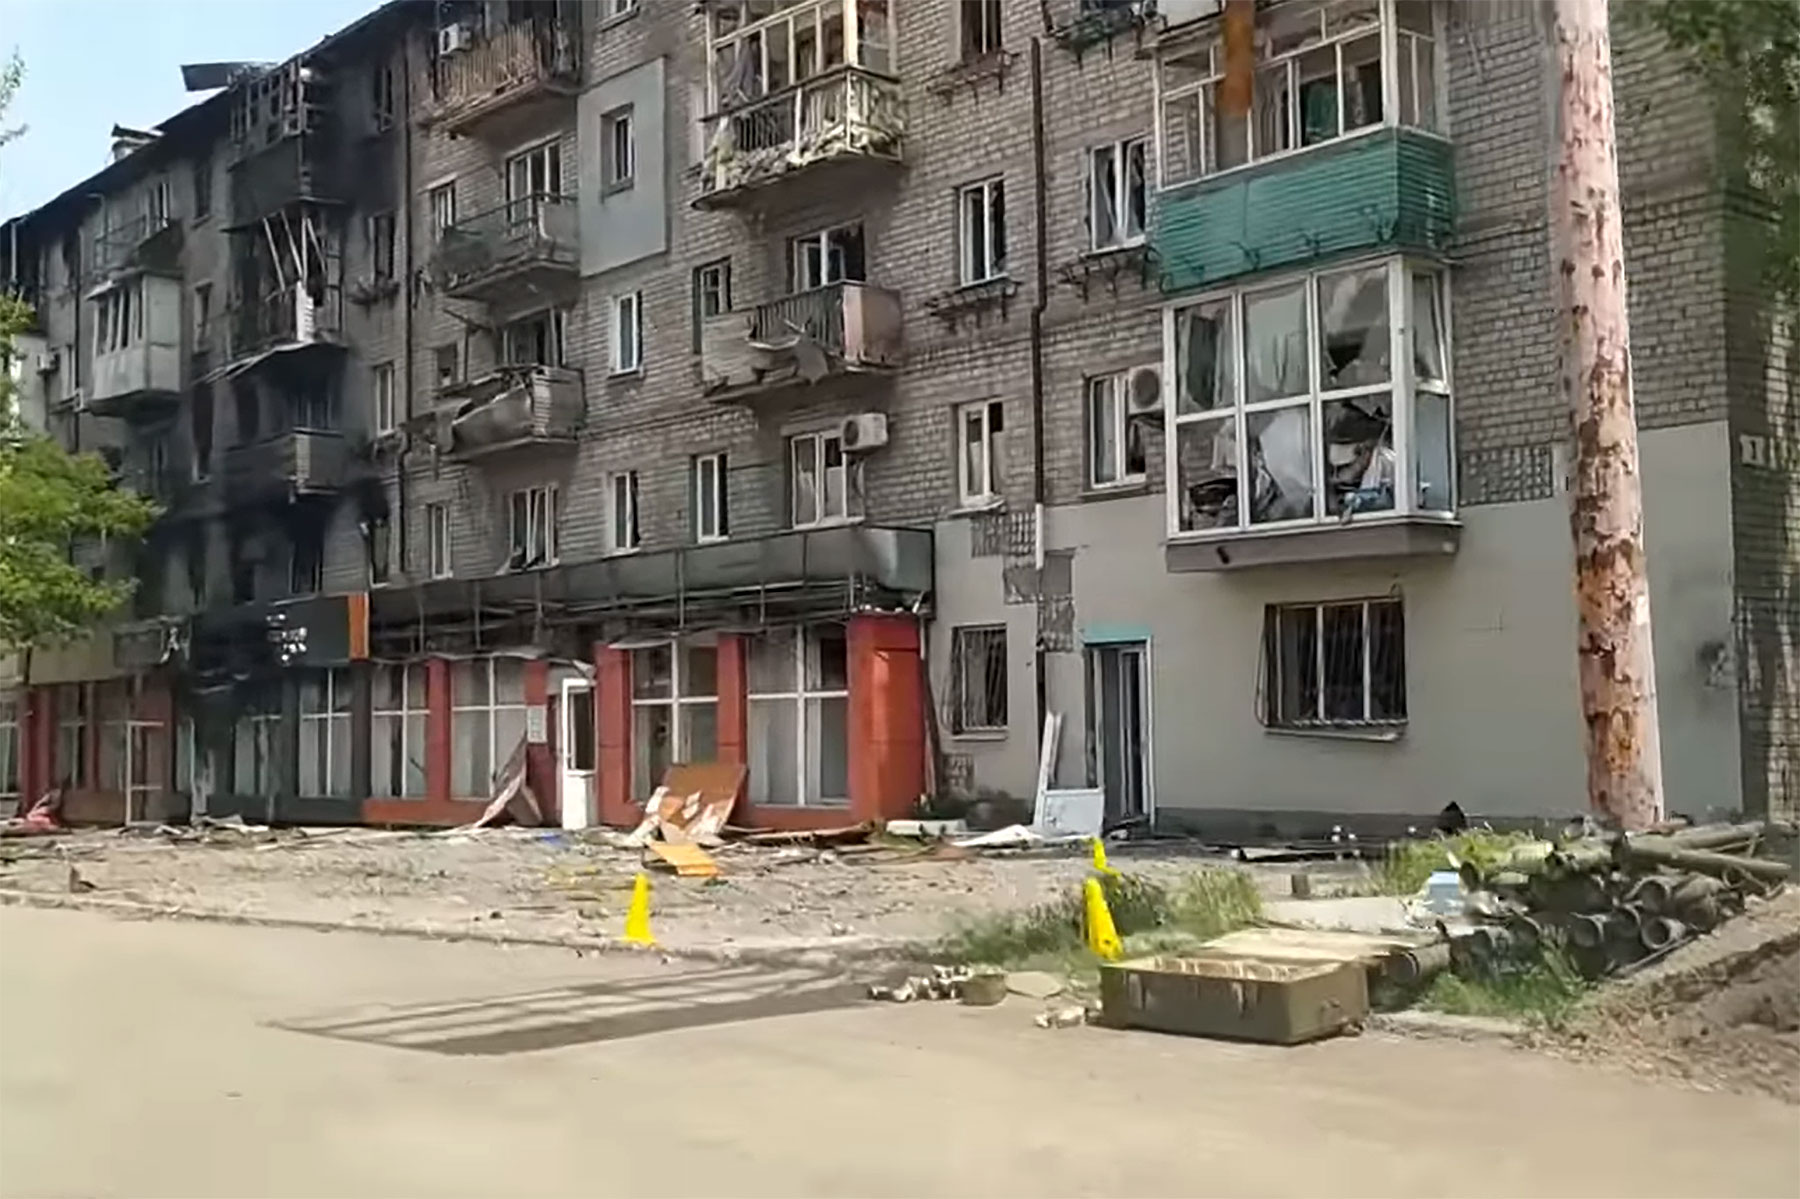 In March 2022, the Mykhailenko spent three weeks hiding in the basement of this apartment block in Mariupol. Photo courtesy of Kateryna Mykhailenko.